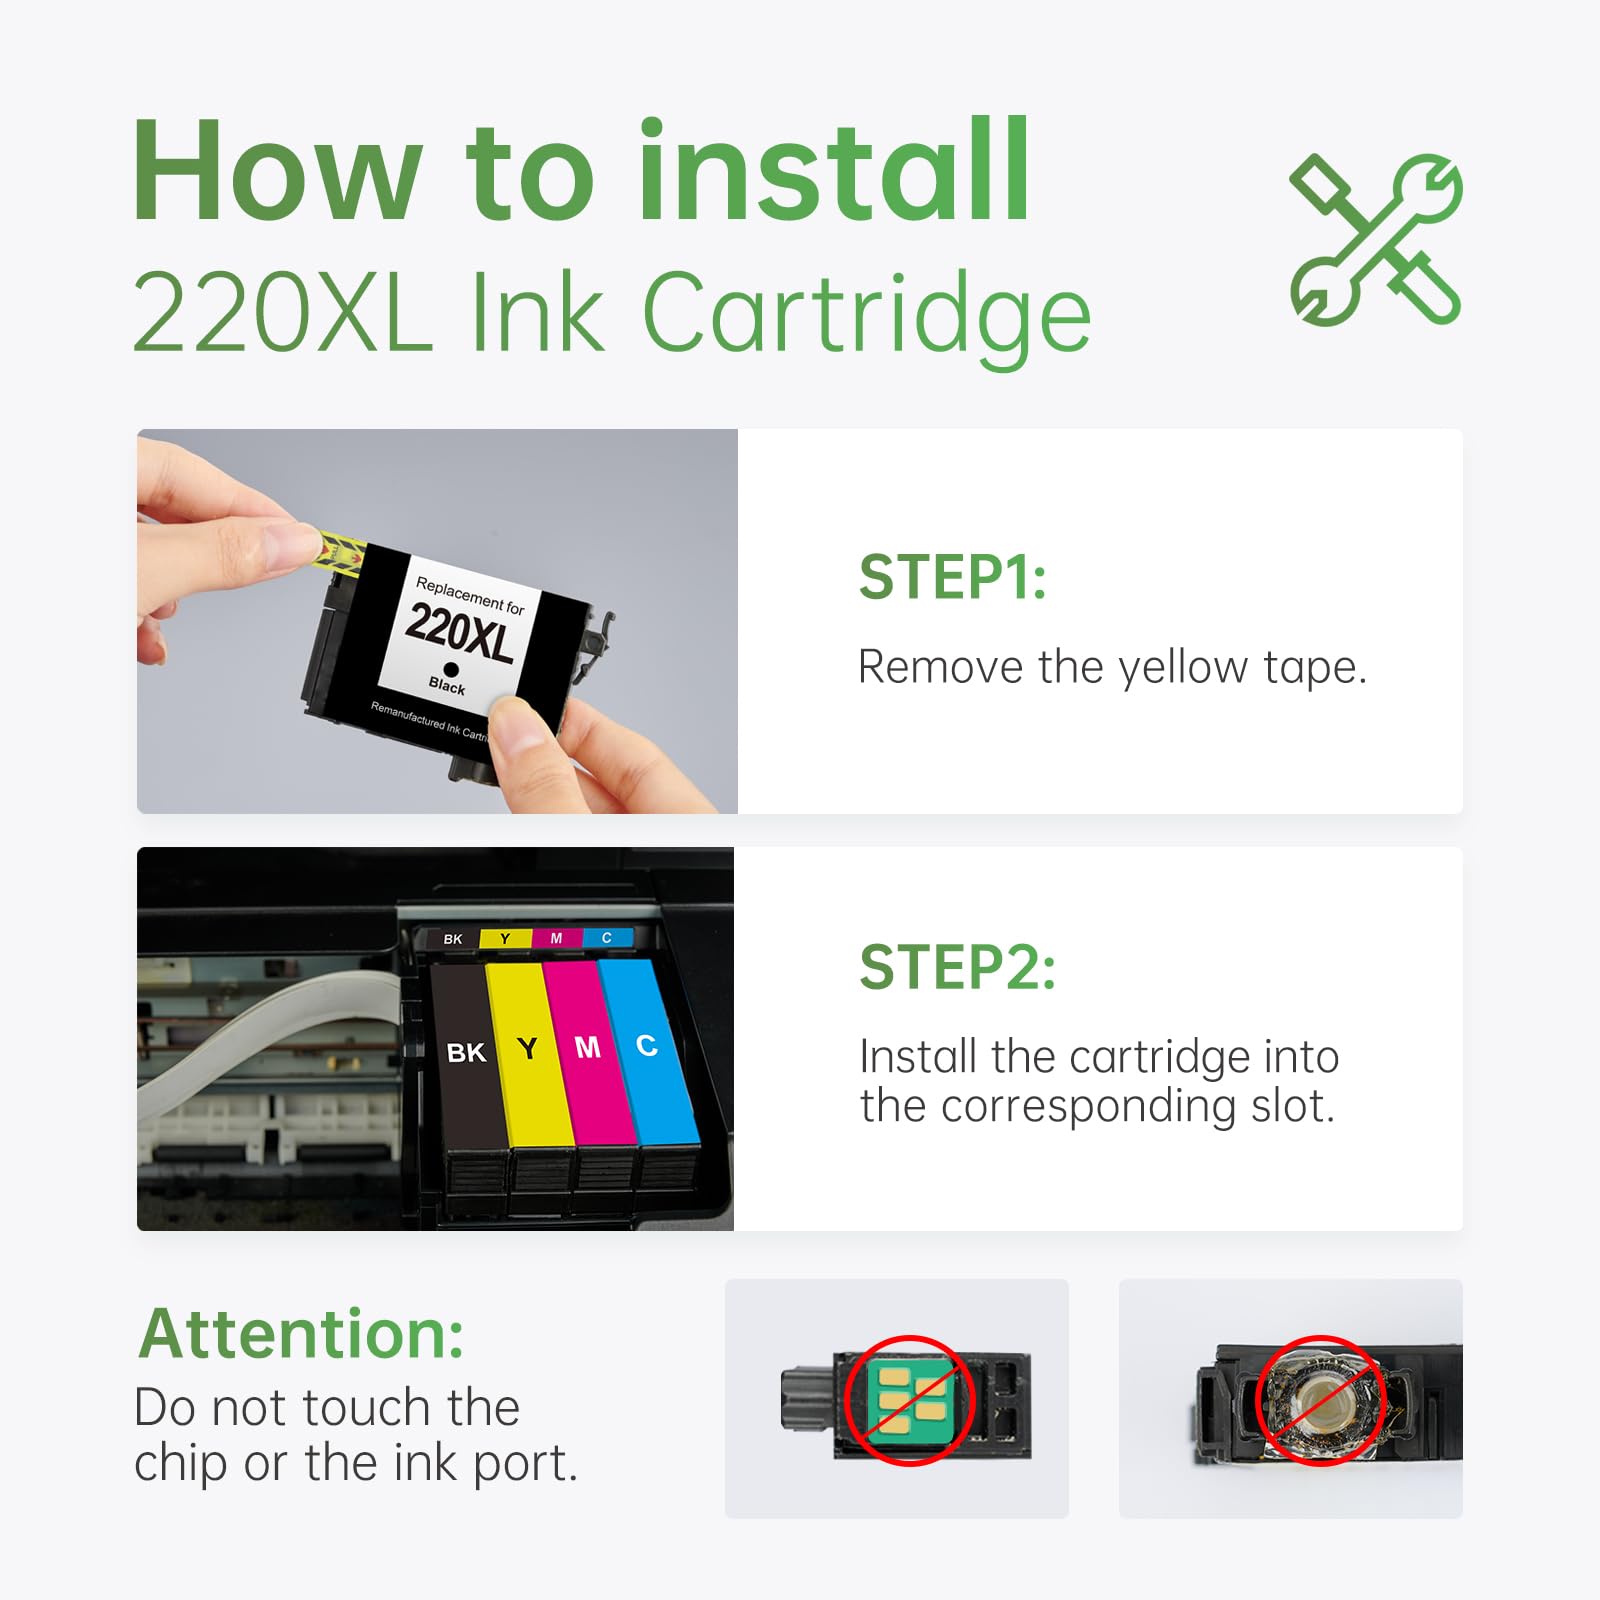 Detailed installation guide for Epson Ink 220XL Cartridges, ensuring correct setup for optimal printing performance.